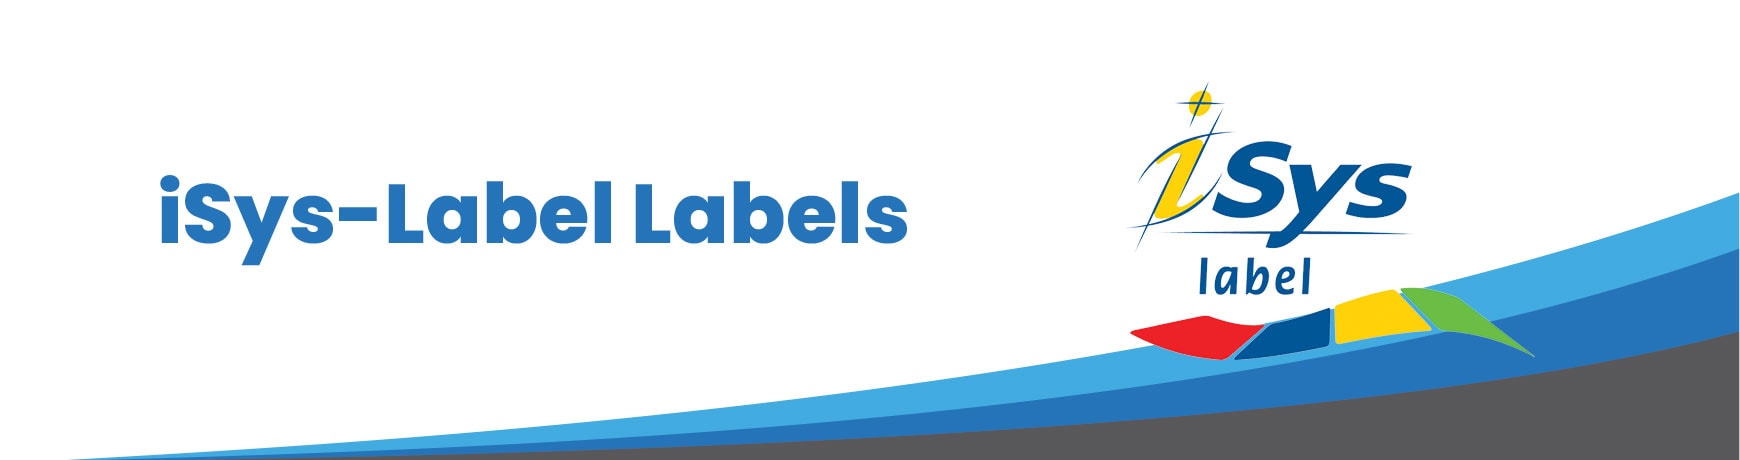 iSys-Label Labels